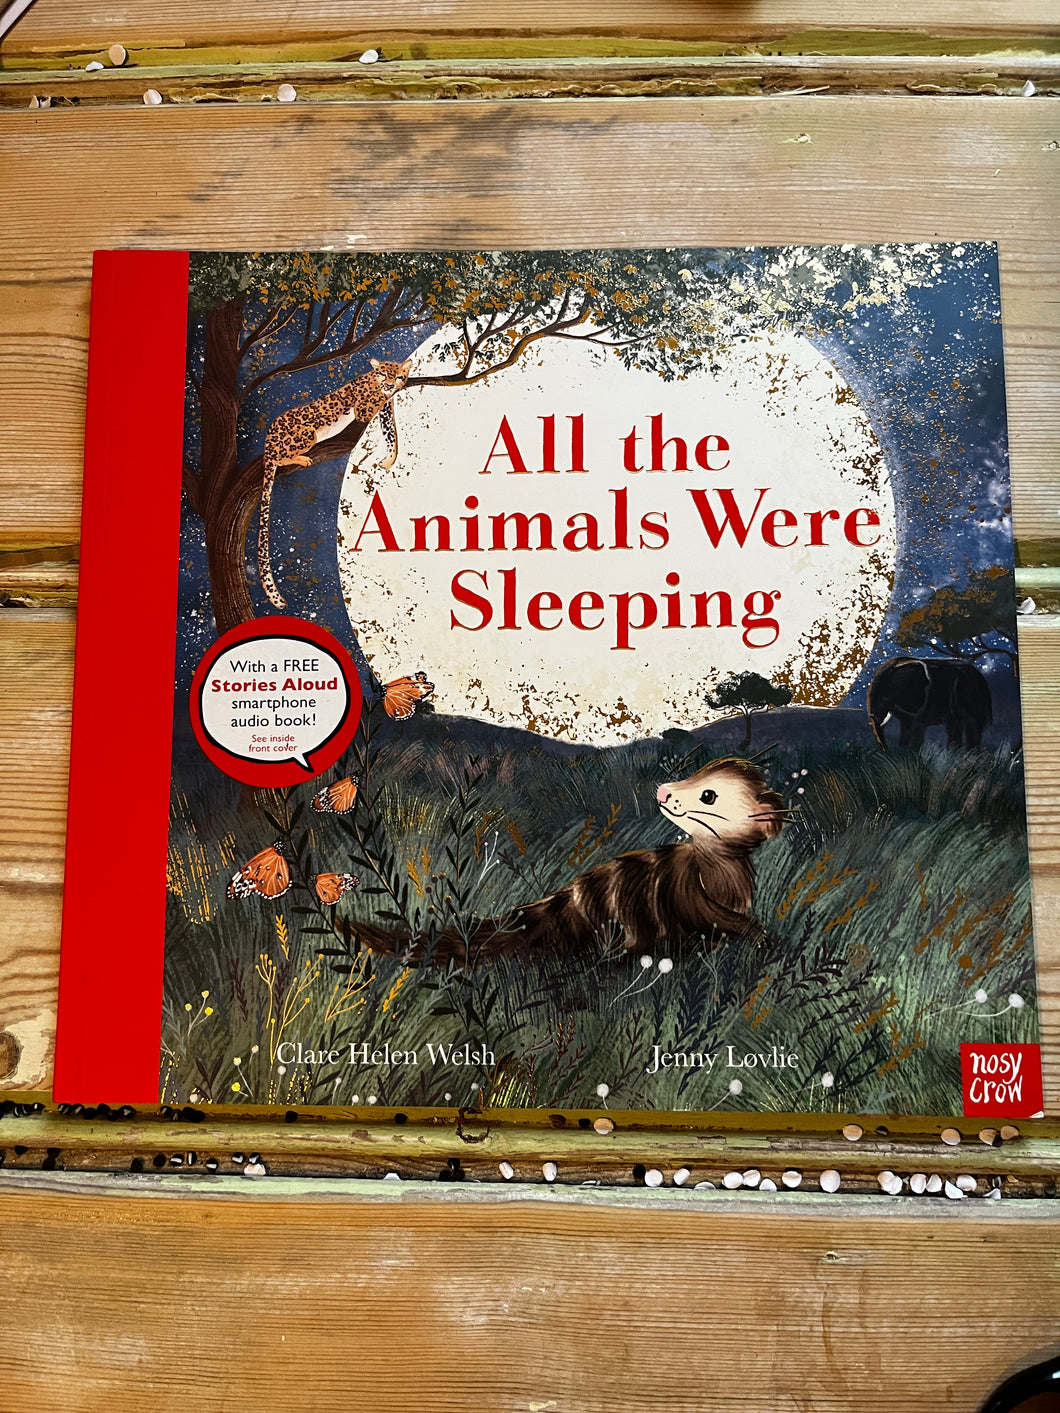 All the Animals Were Sleeping by Clare Helen Welsh